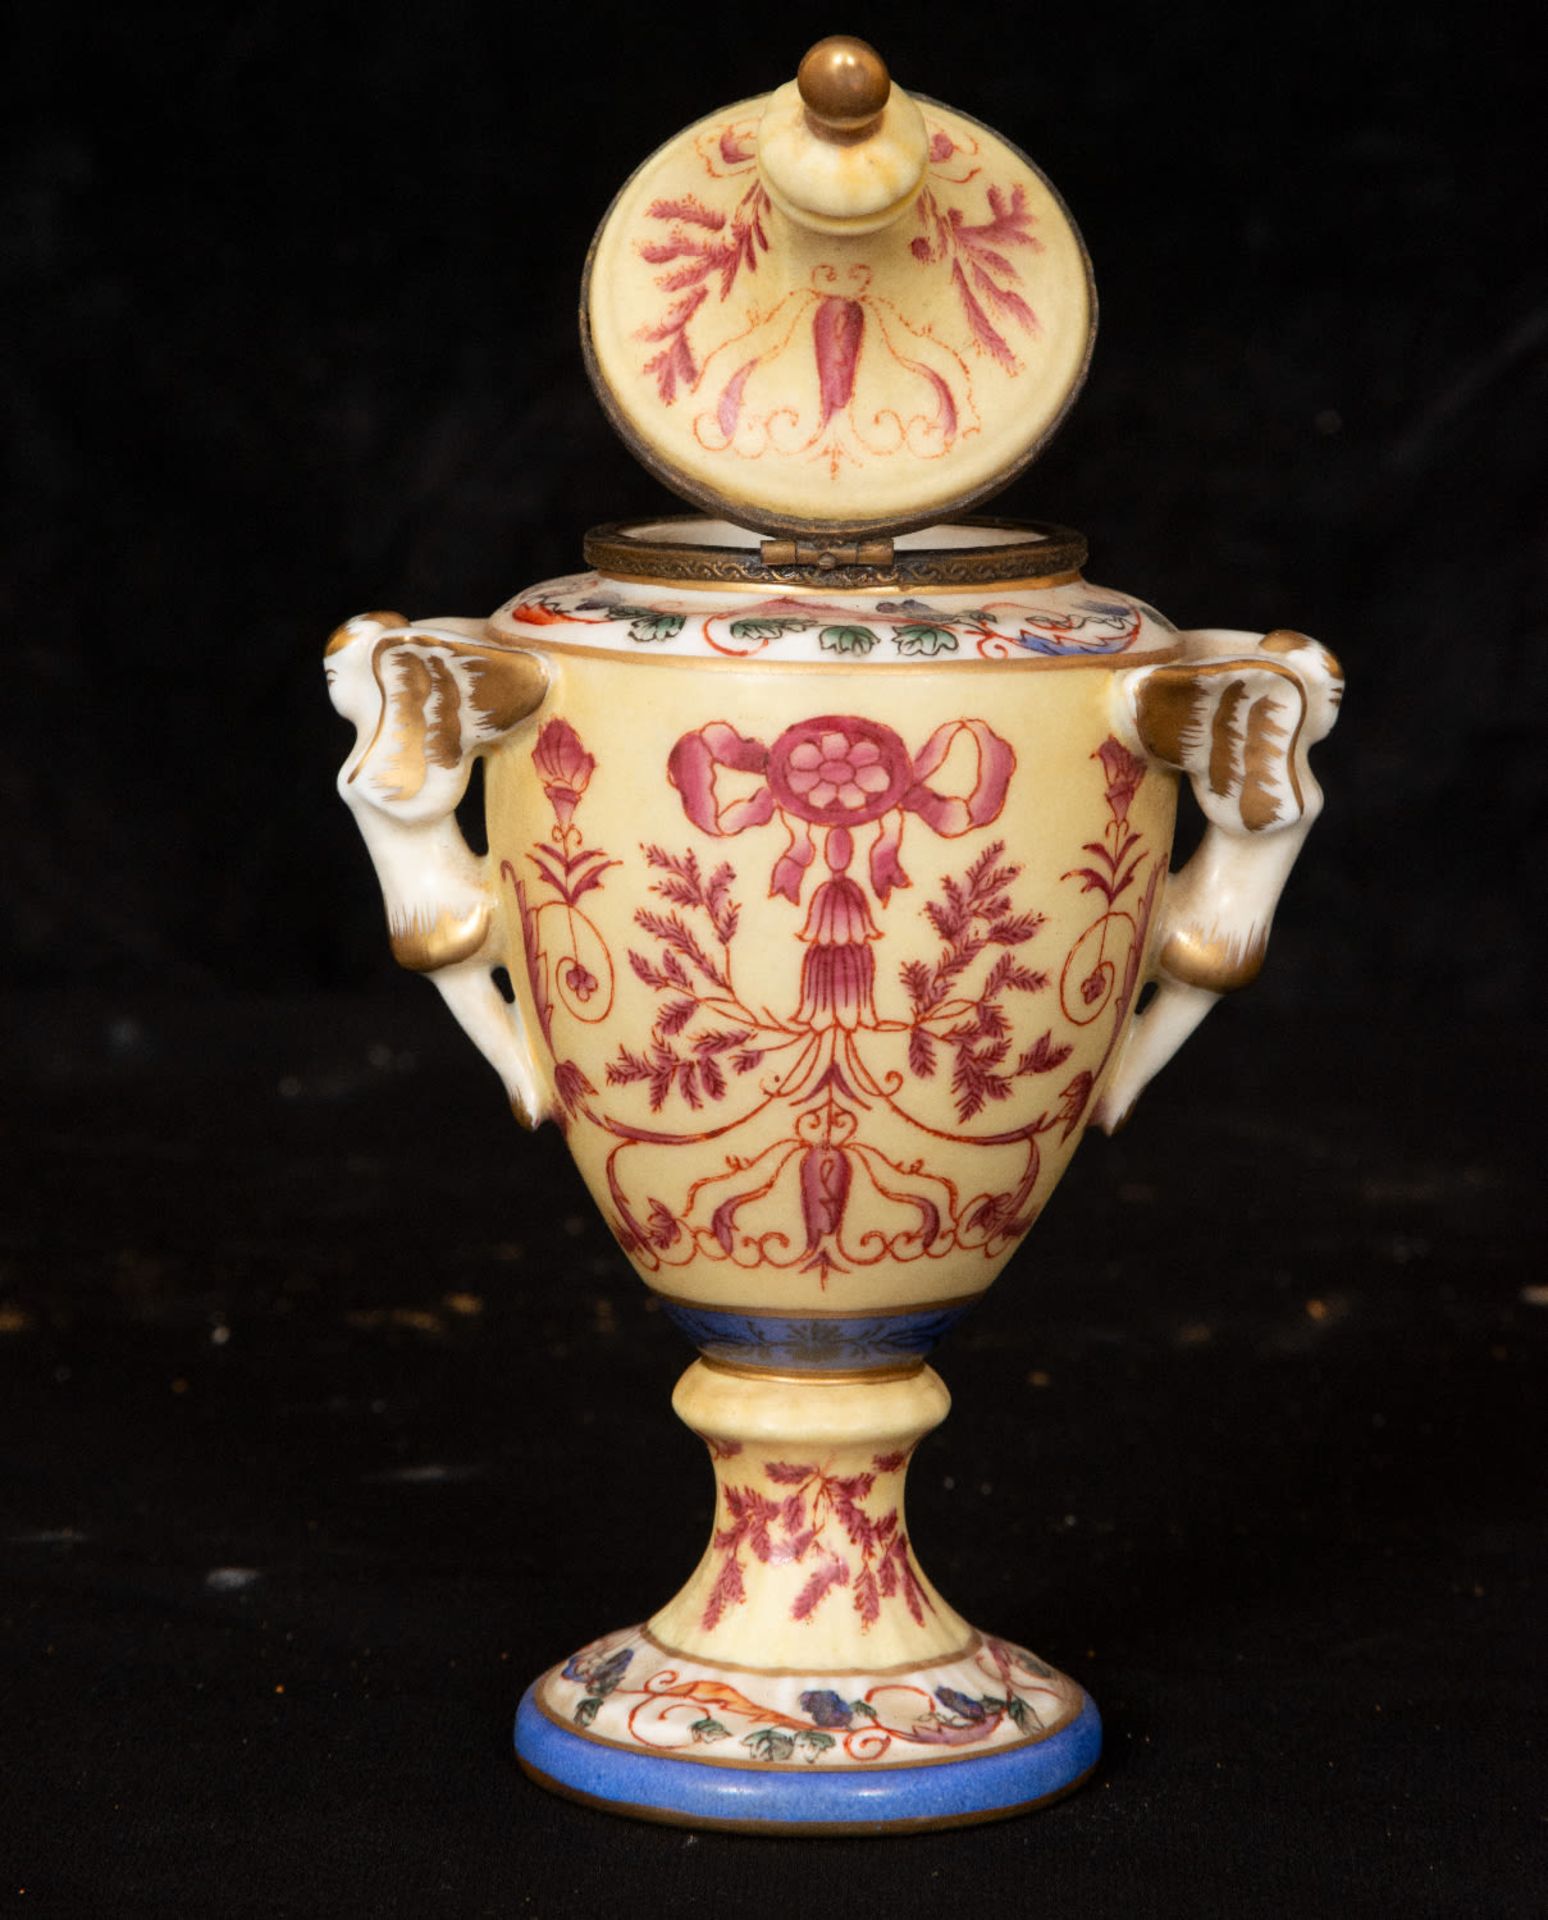 Pair of Fireplace Vases in German Meissen porcelain, late 19th century - Image 5 of 5